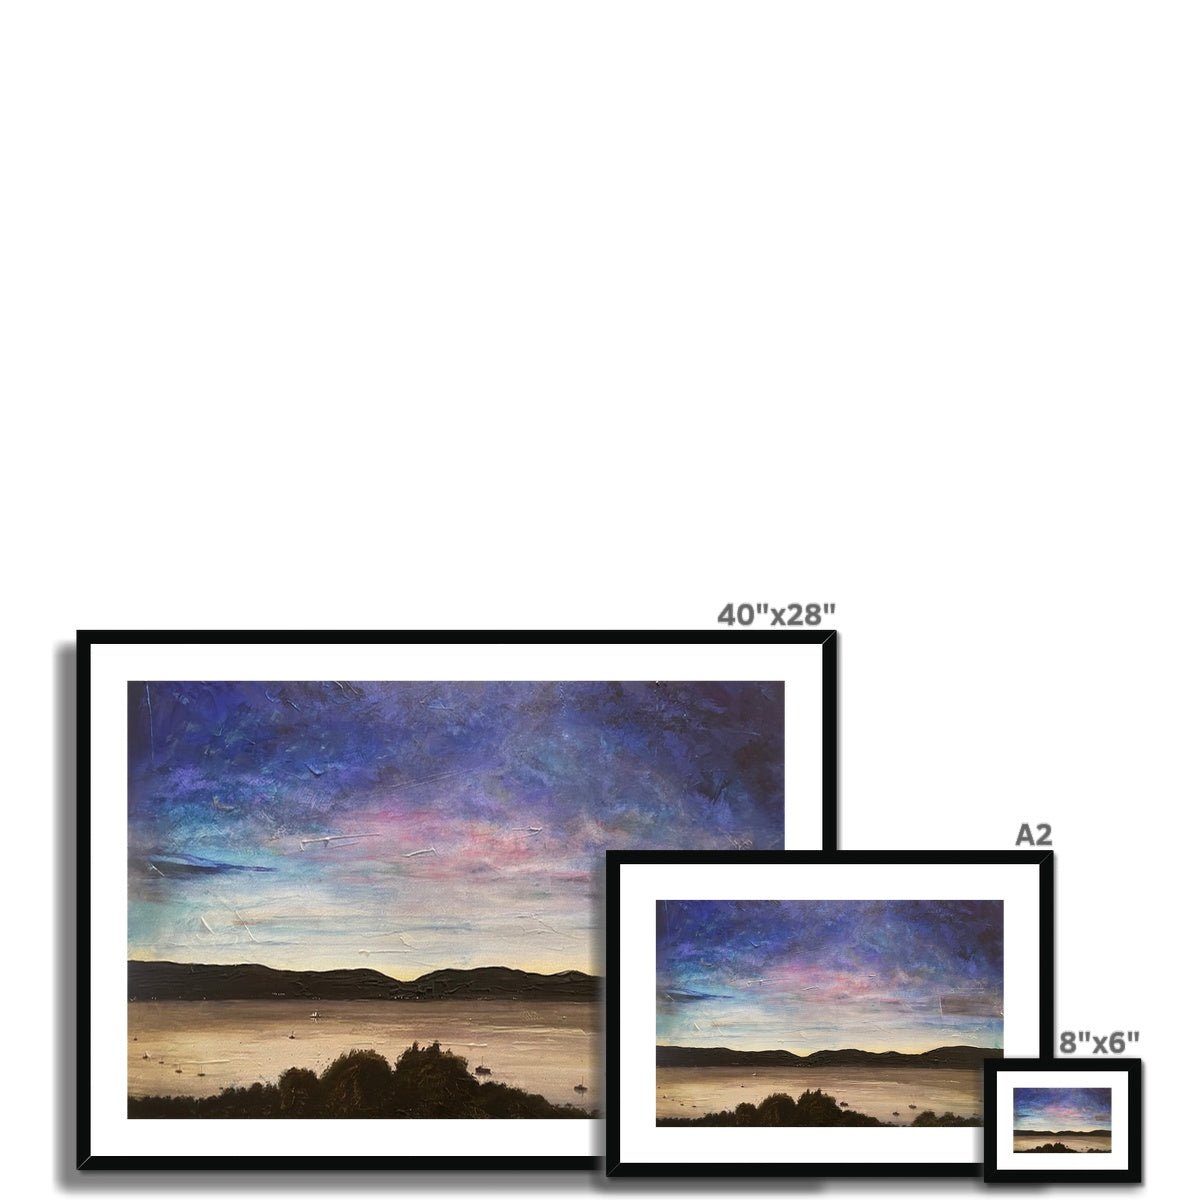 River Clyde Twilight Painting | Framed & Mounted Prints From Scotland-Framed & Mounted Prints-River Clyde Art Gallery-Paintings, Prints, Homeware, Art Gifts From Scotland By Scottish Artist Kevin Hunter